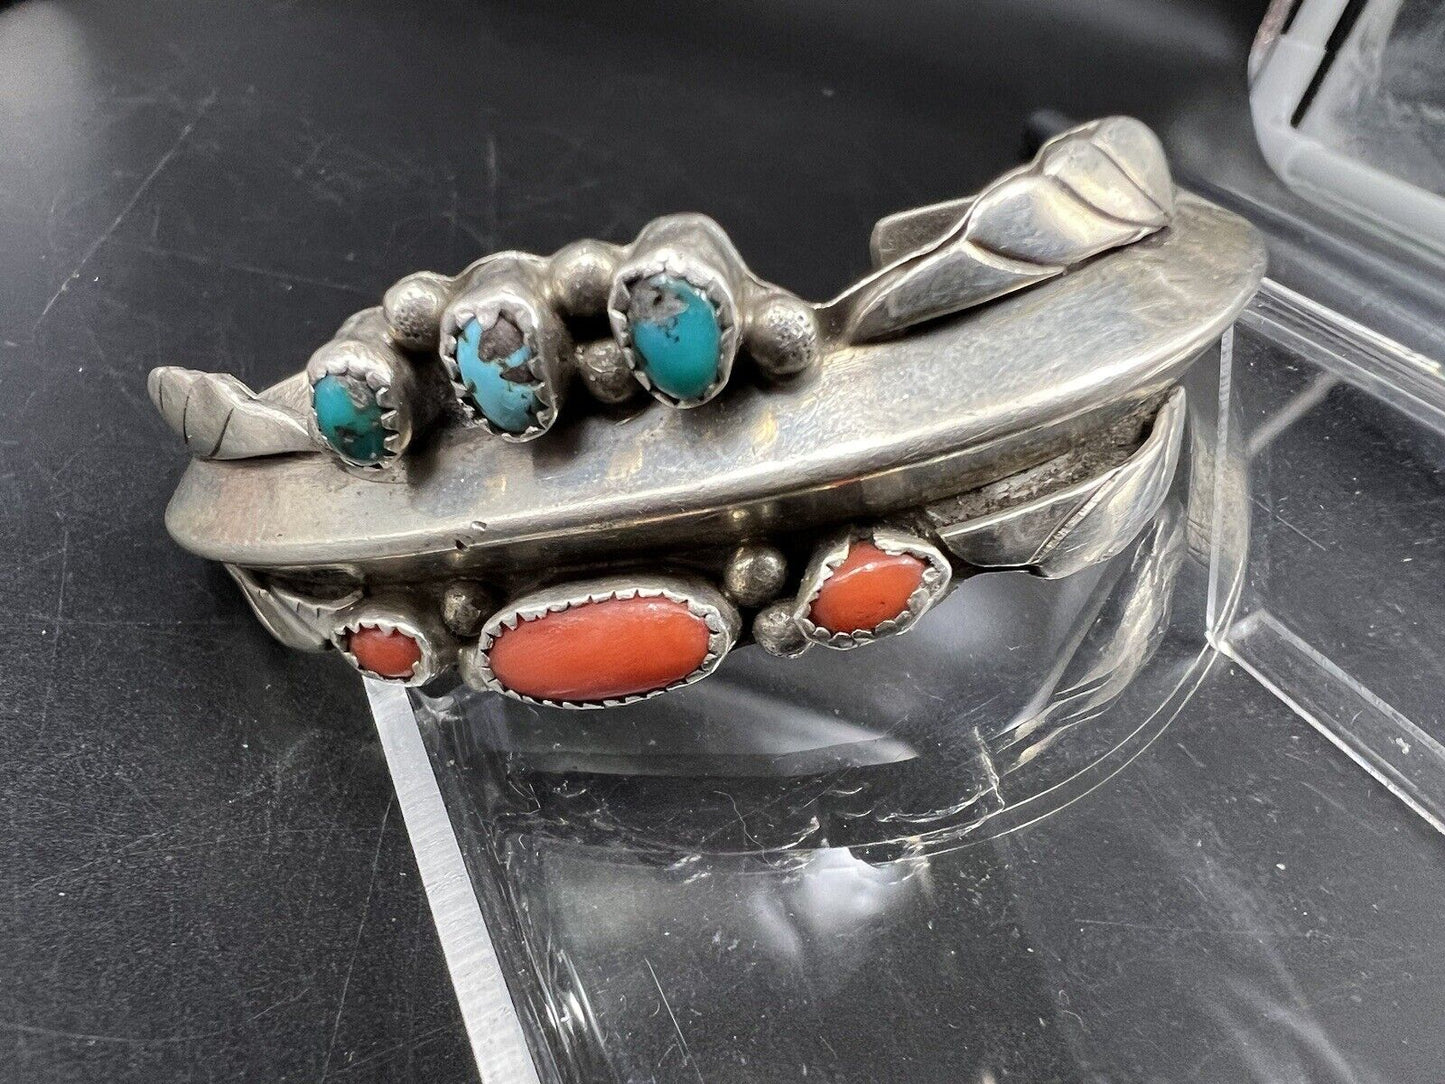 50.5 Gram Sterling Silver Authentic Native American Bracelet w/ Turquoise Used